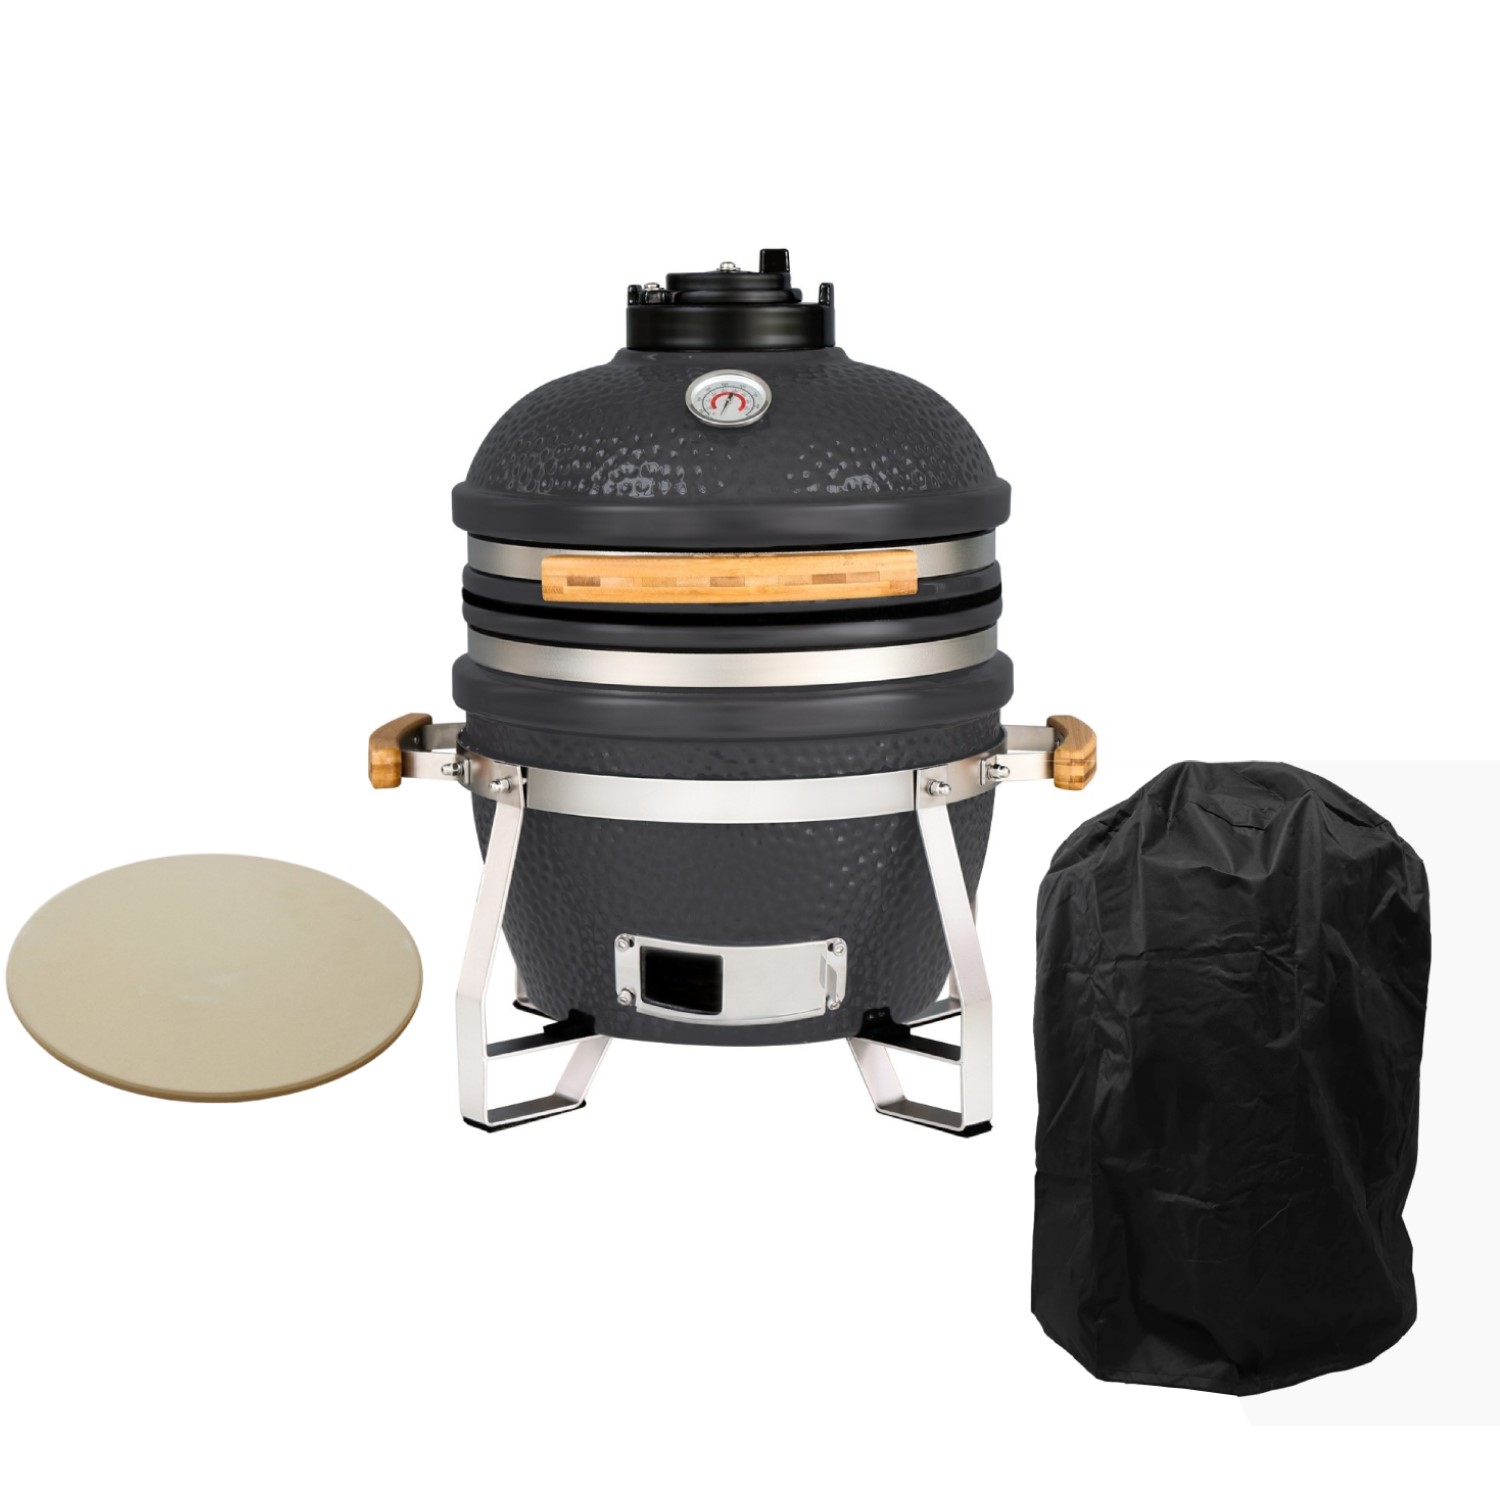 Boss Grill The Egg XS - 15 Inch Ceramic Kamado Style Charcoal Egg BBQ Grill - Grey